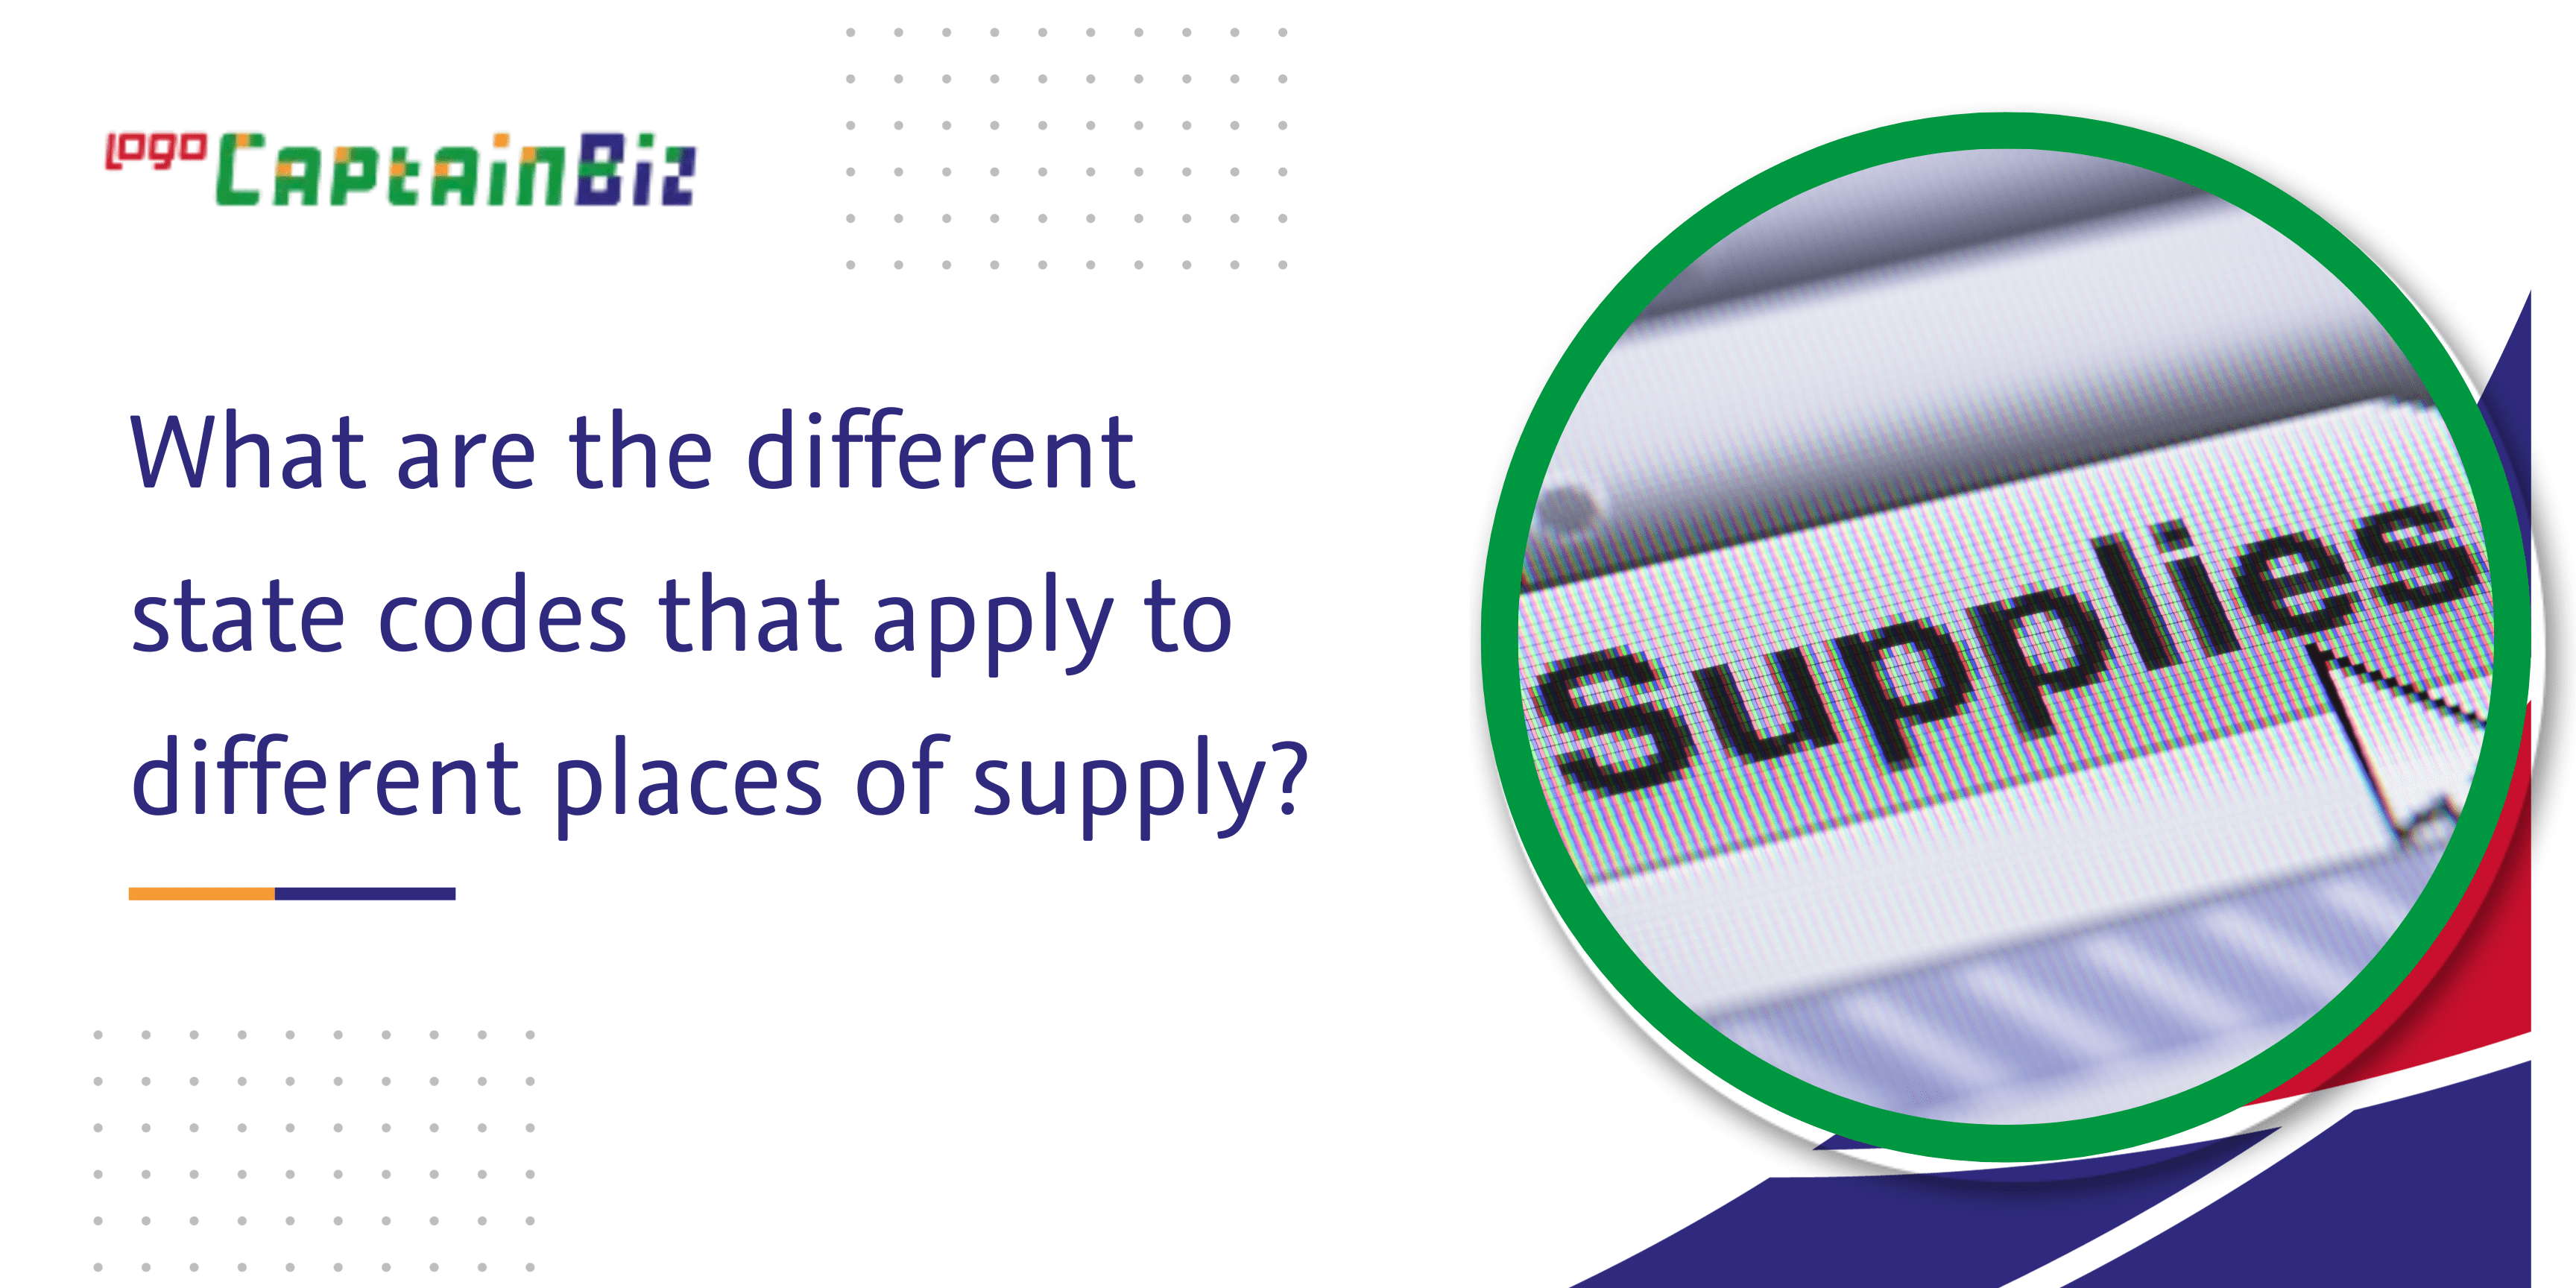 What are the different state codes that apply to different places of supply?